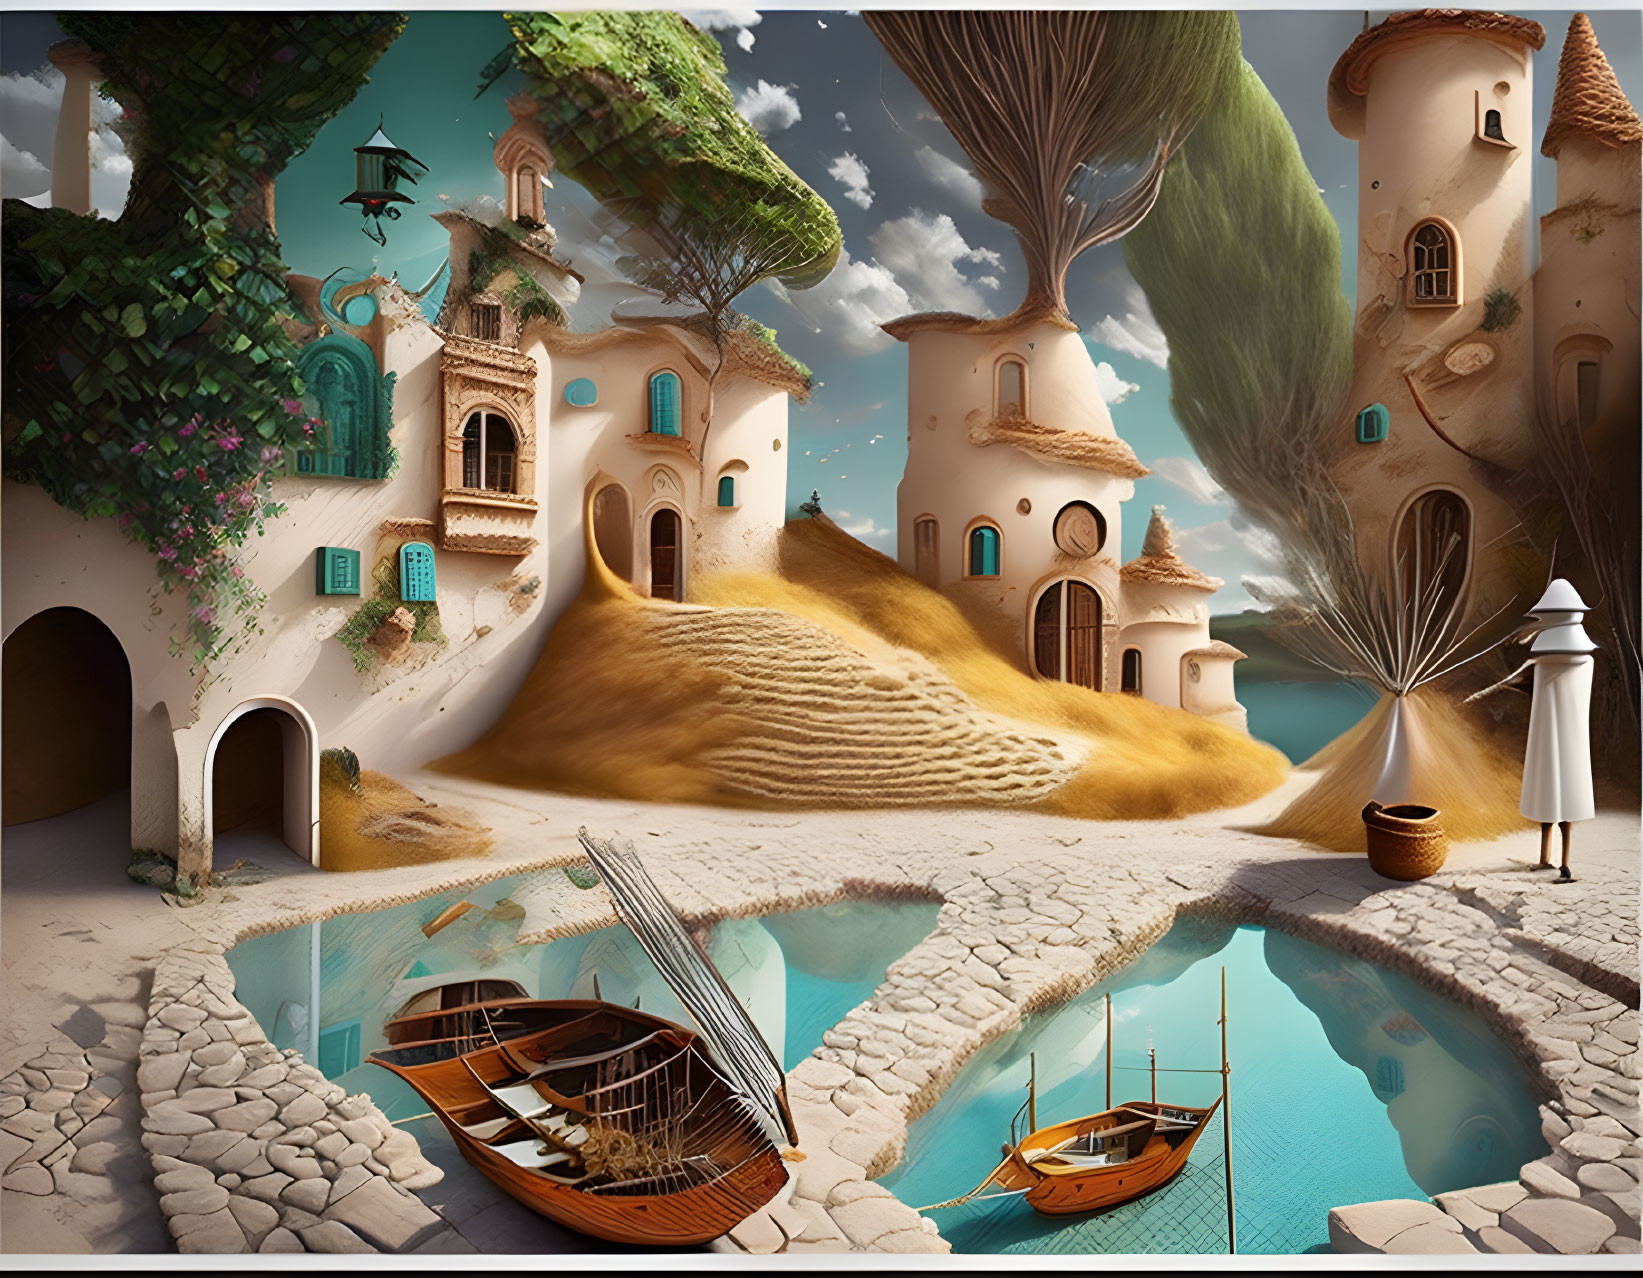 Whimsical sandy landscape with houses, trees, boats, and clear sky